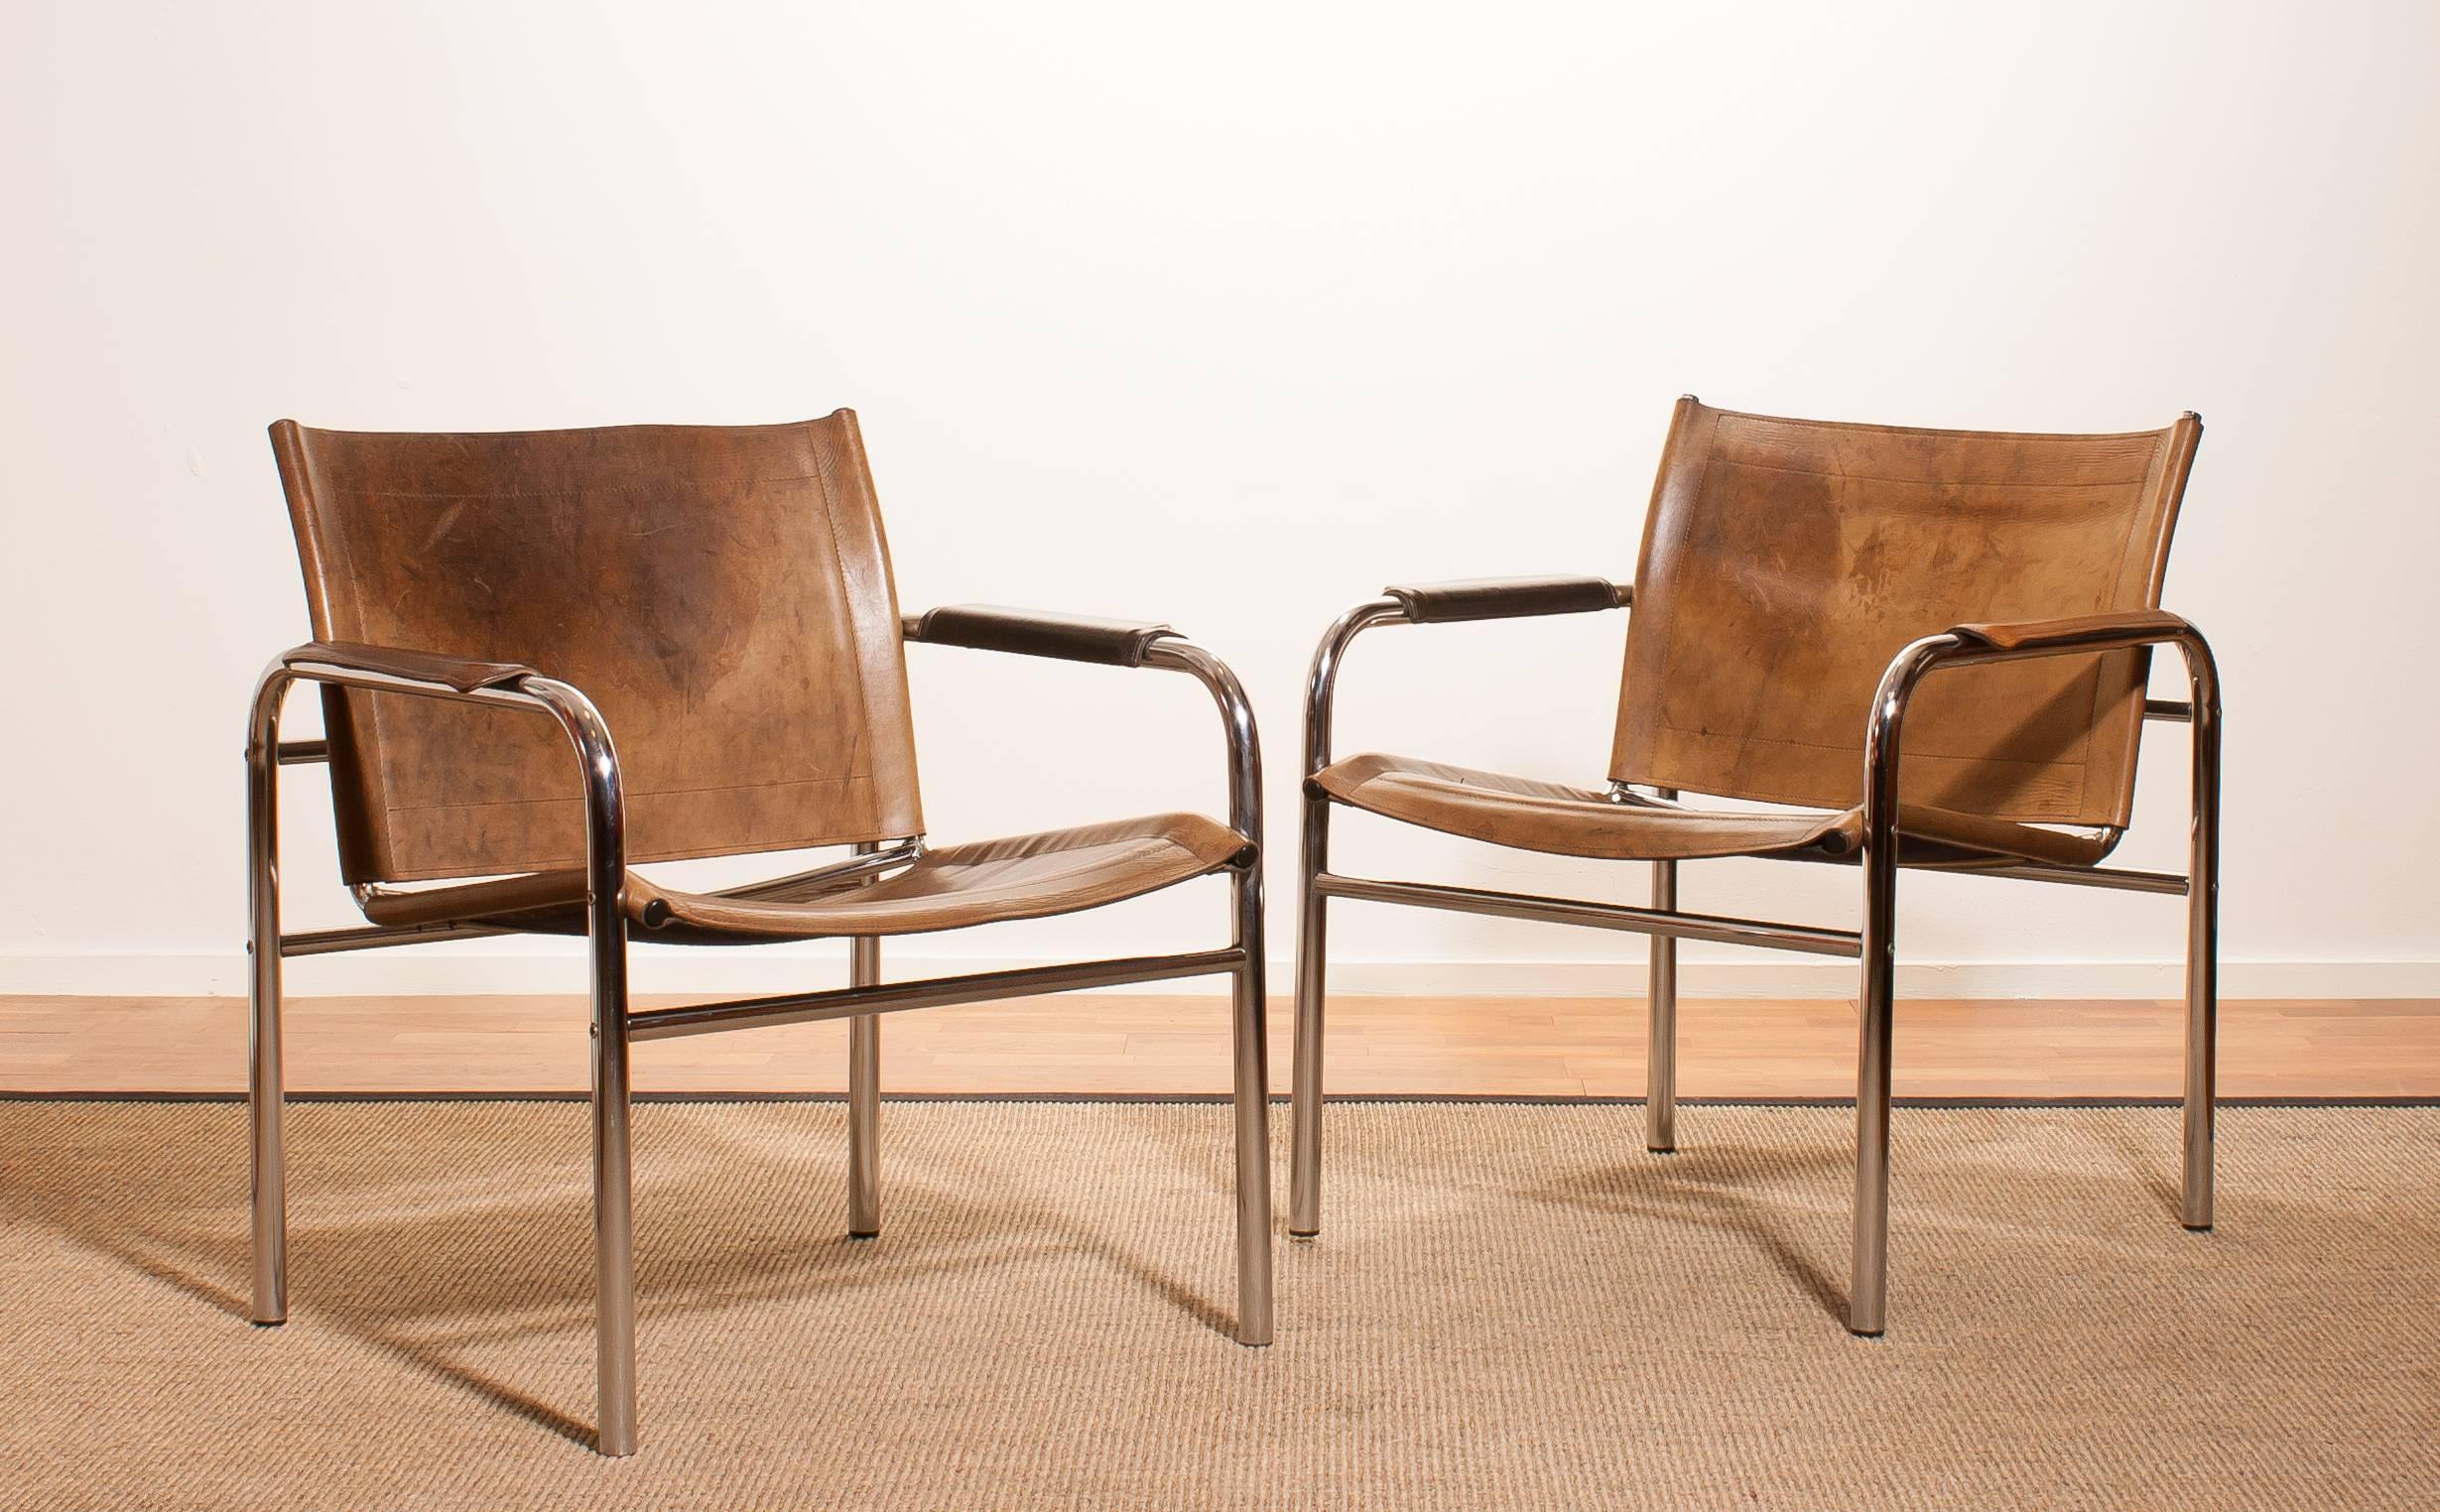 Very nice pair of armchairs, model Klinte, designed by Tord Björklund Sweden.
The chairs having a tubular chromed steel frame with light brown-taupe leather back seating and armrest with a beautiful patina.
Period 1960s
Dimensions: H.74 cm , W.68 cm